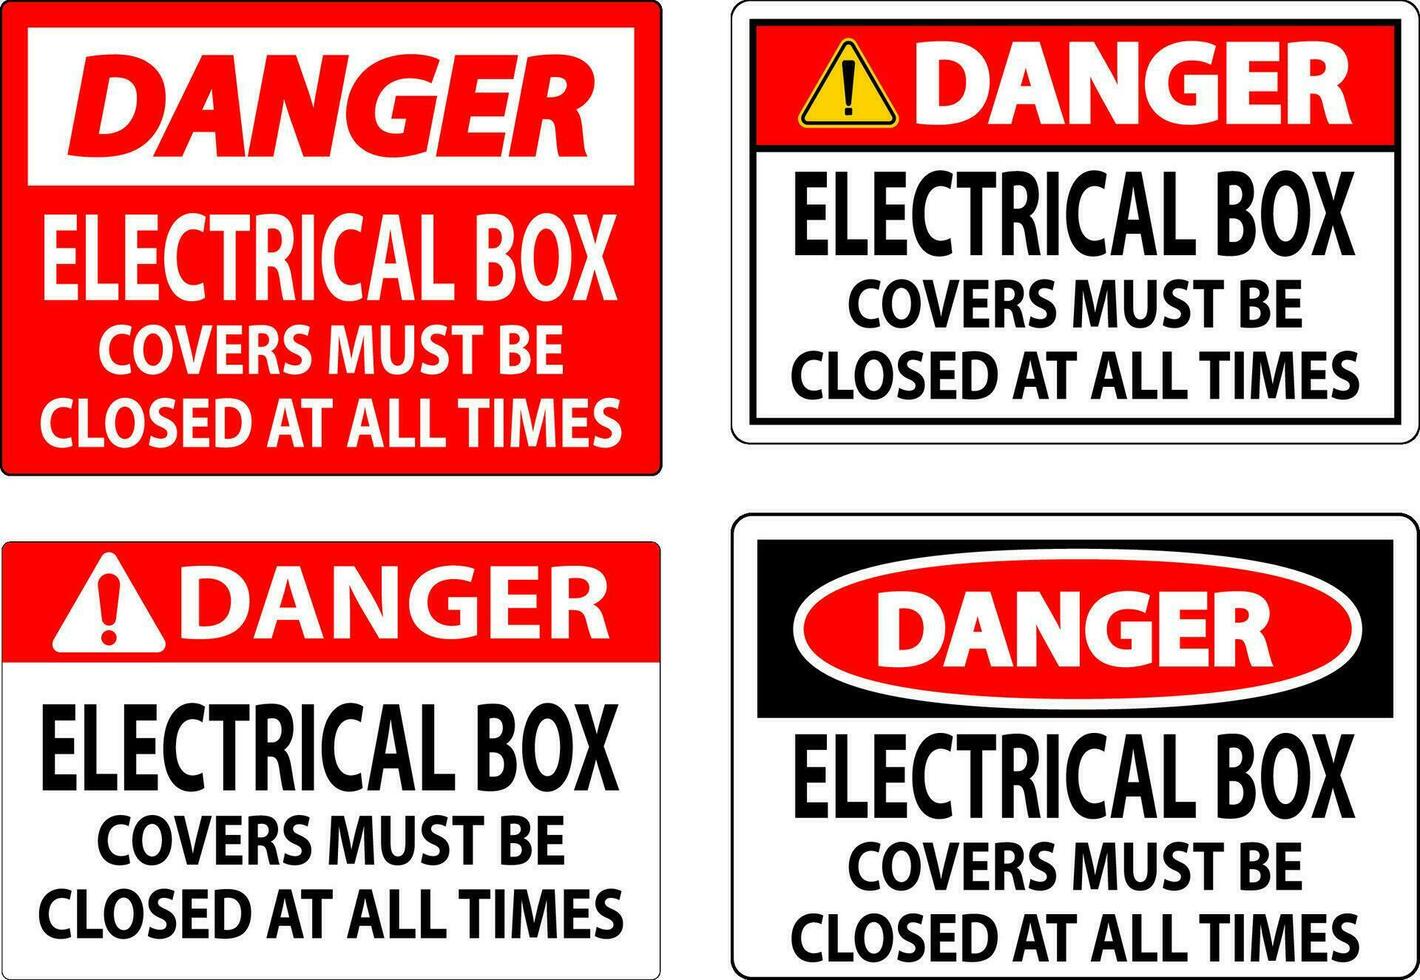 Danger Sign Electrical Box Covers Must Be Closed At All Times vector